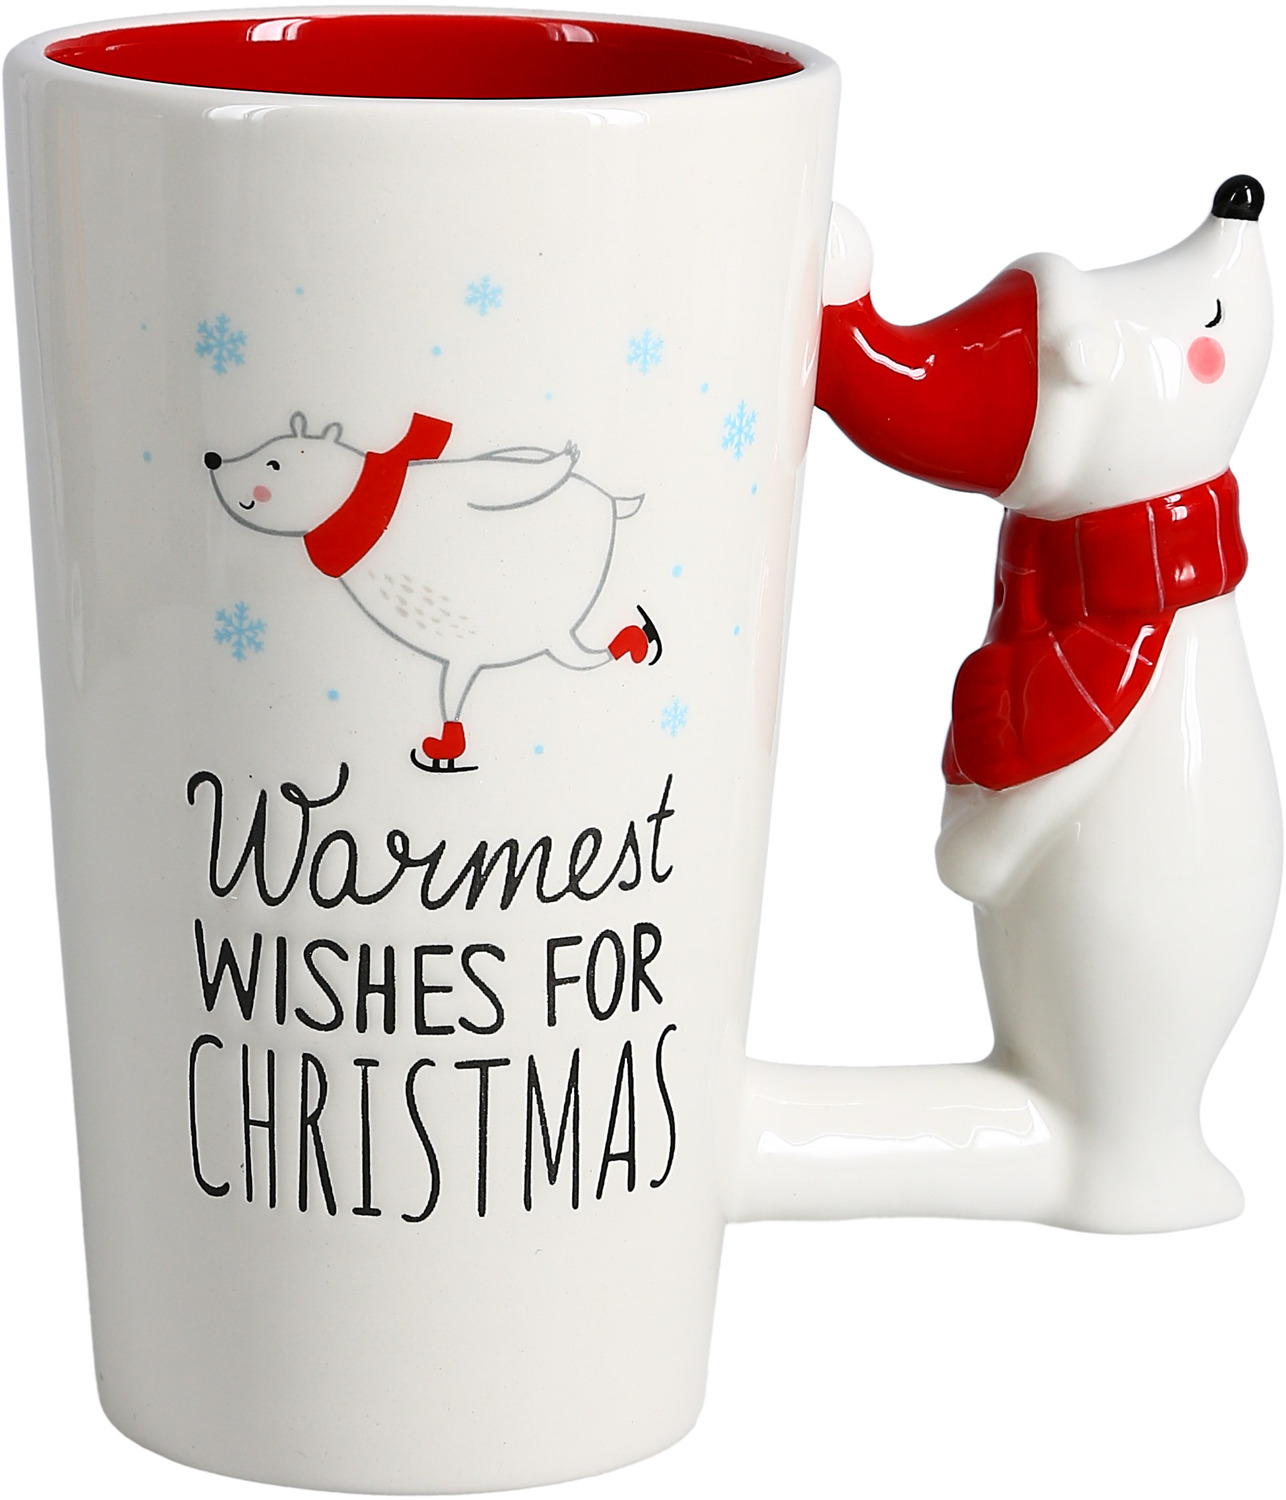 Warmest Wishes by Holiday Hoopla - Warmest Wishes - 17.5 oz Latte Cup